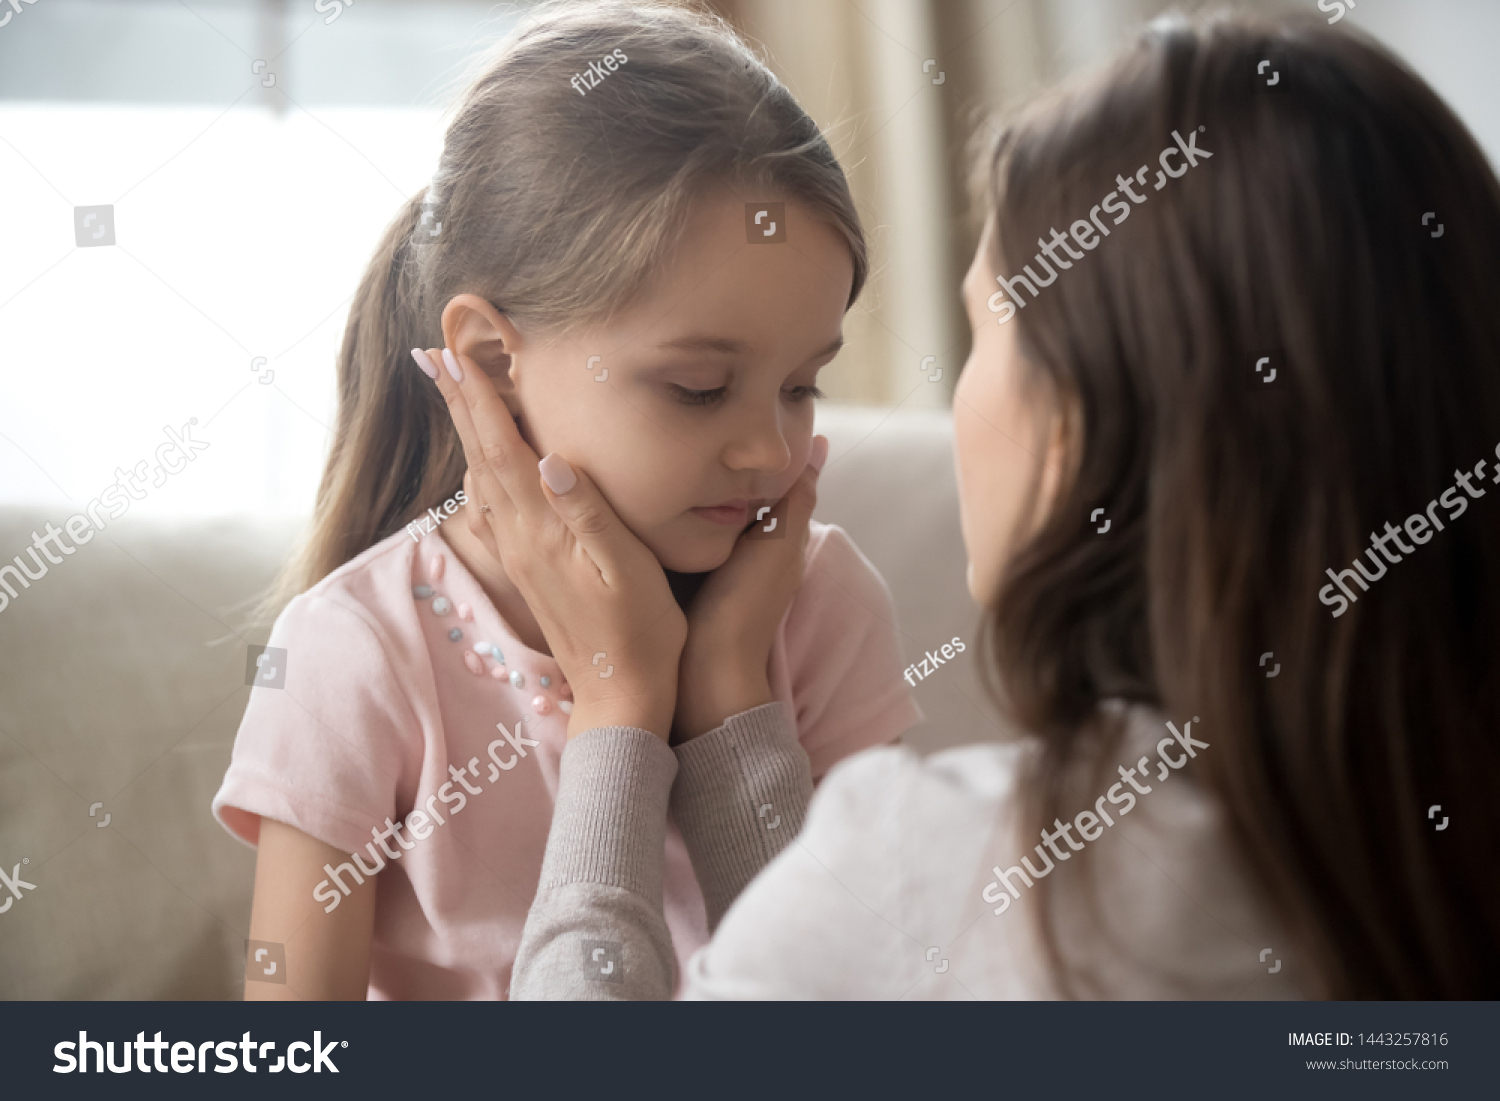 Loving young mother touching upset little daughter face, expressing support, young mum comforting offended adorable preschool girl, showing love and care, child psychologist concept, close up #1443257816